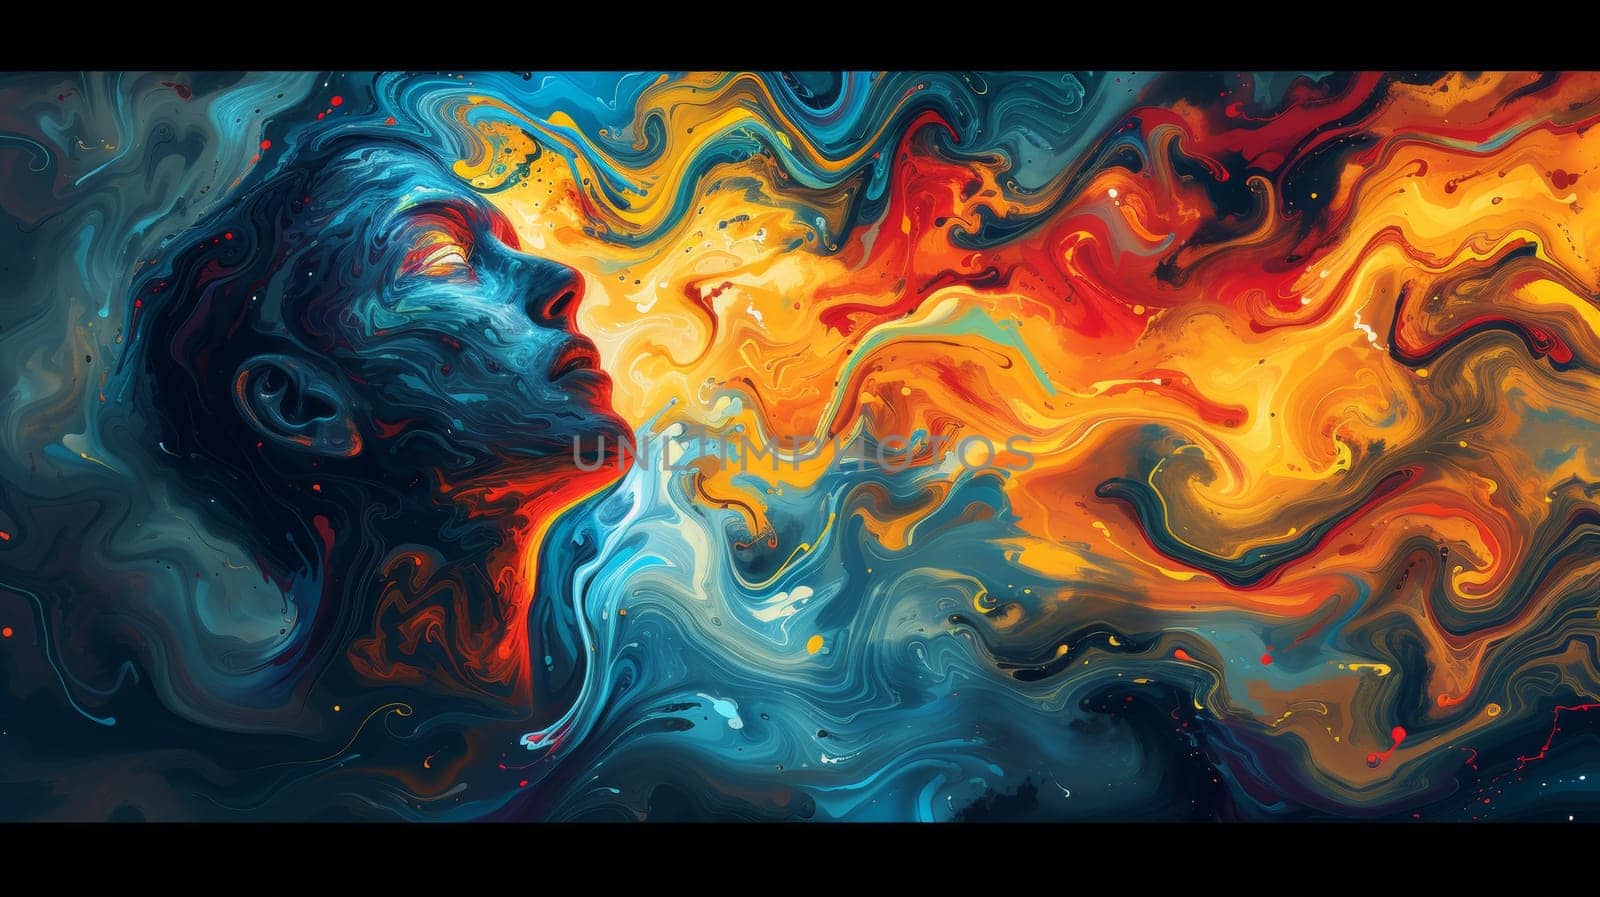 A painting of a man's face with swirling colors and swirls